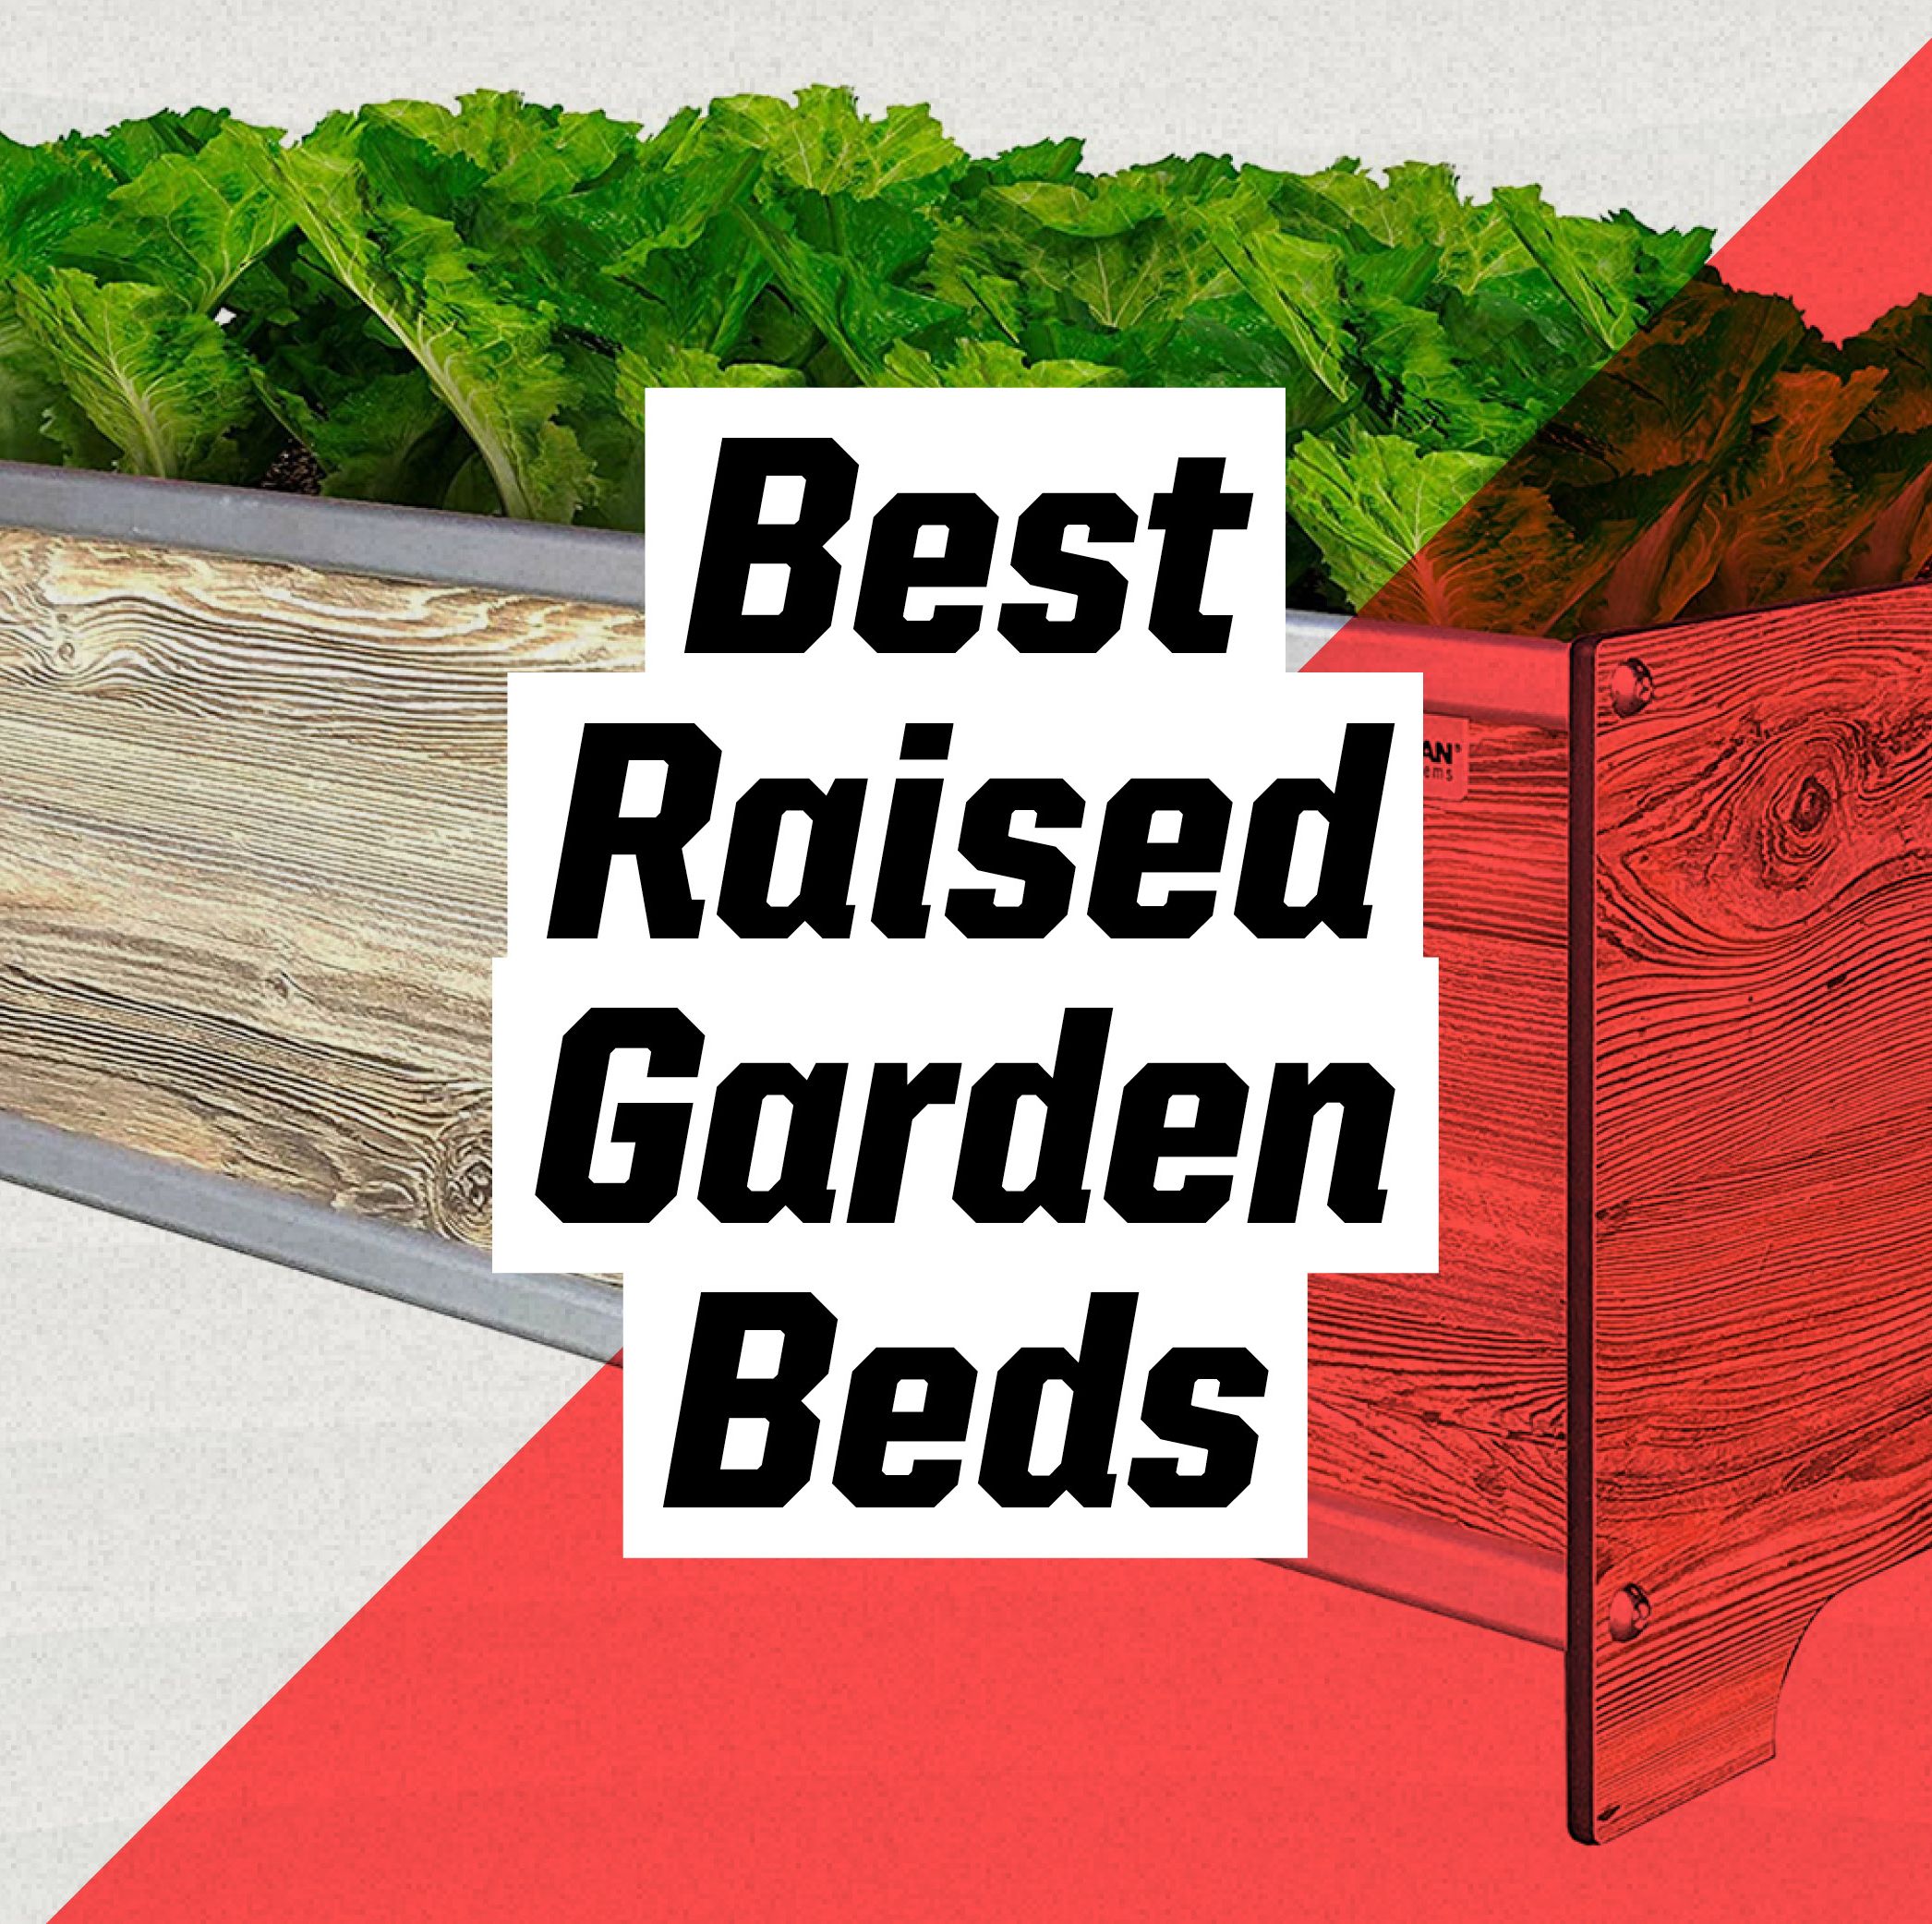 The 9 Best Raised Garden Beds for Making Your Plants Happy